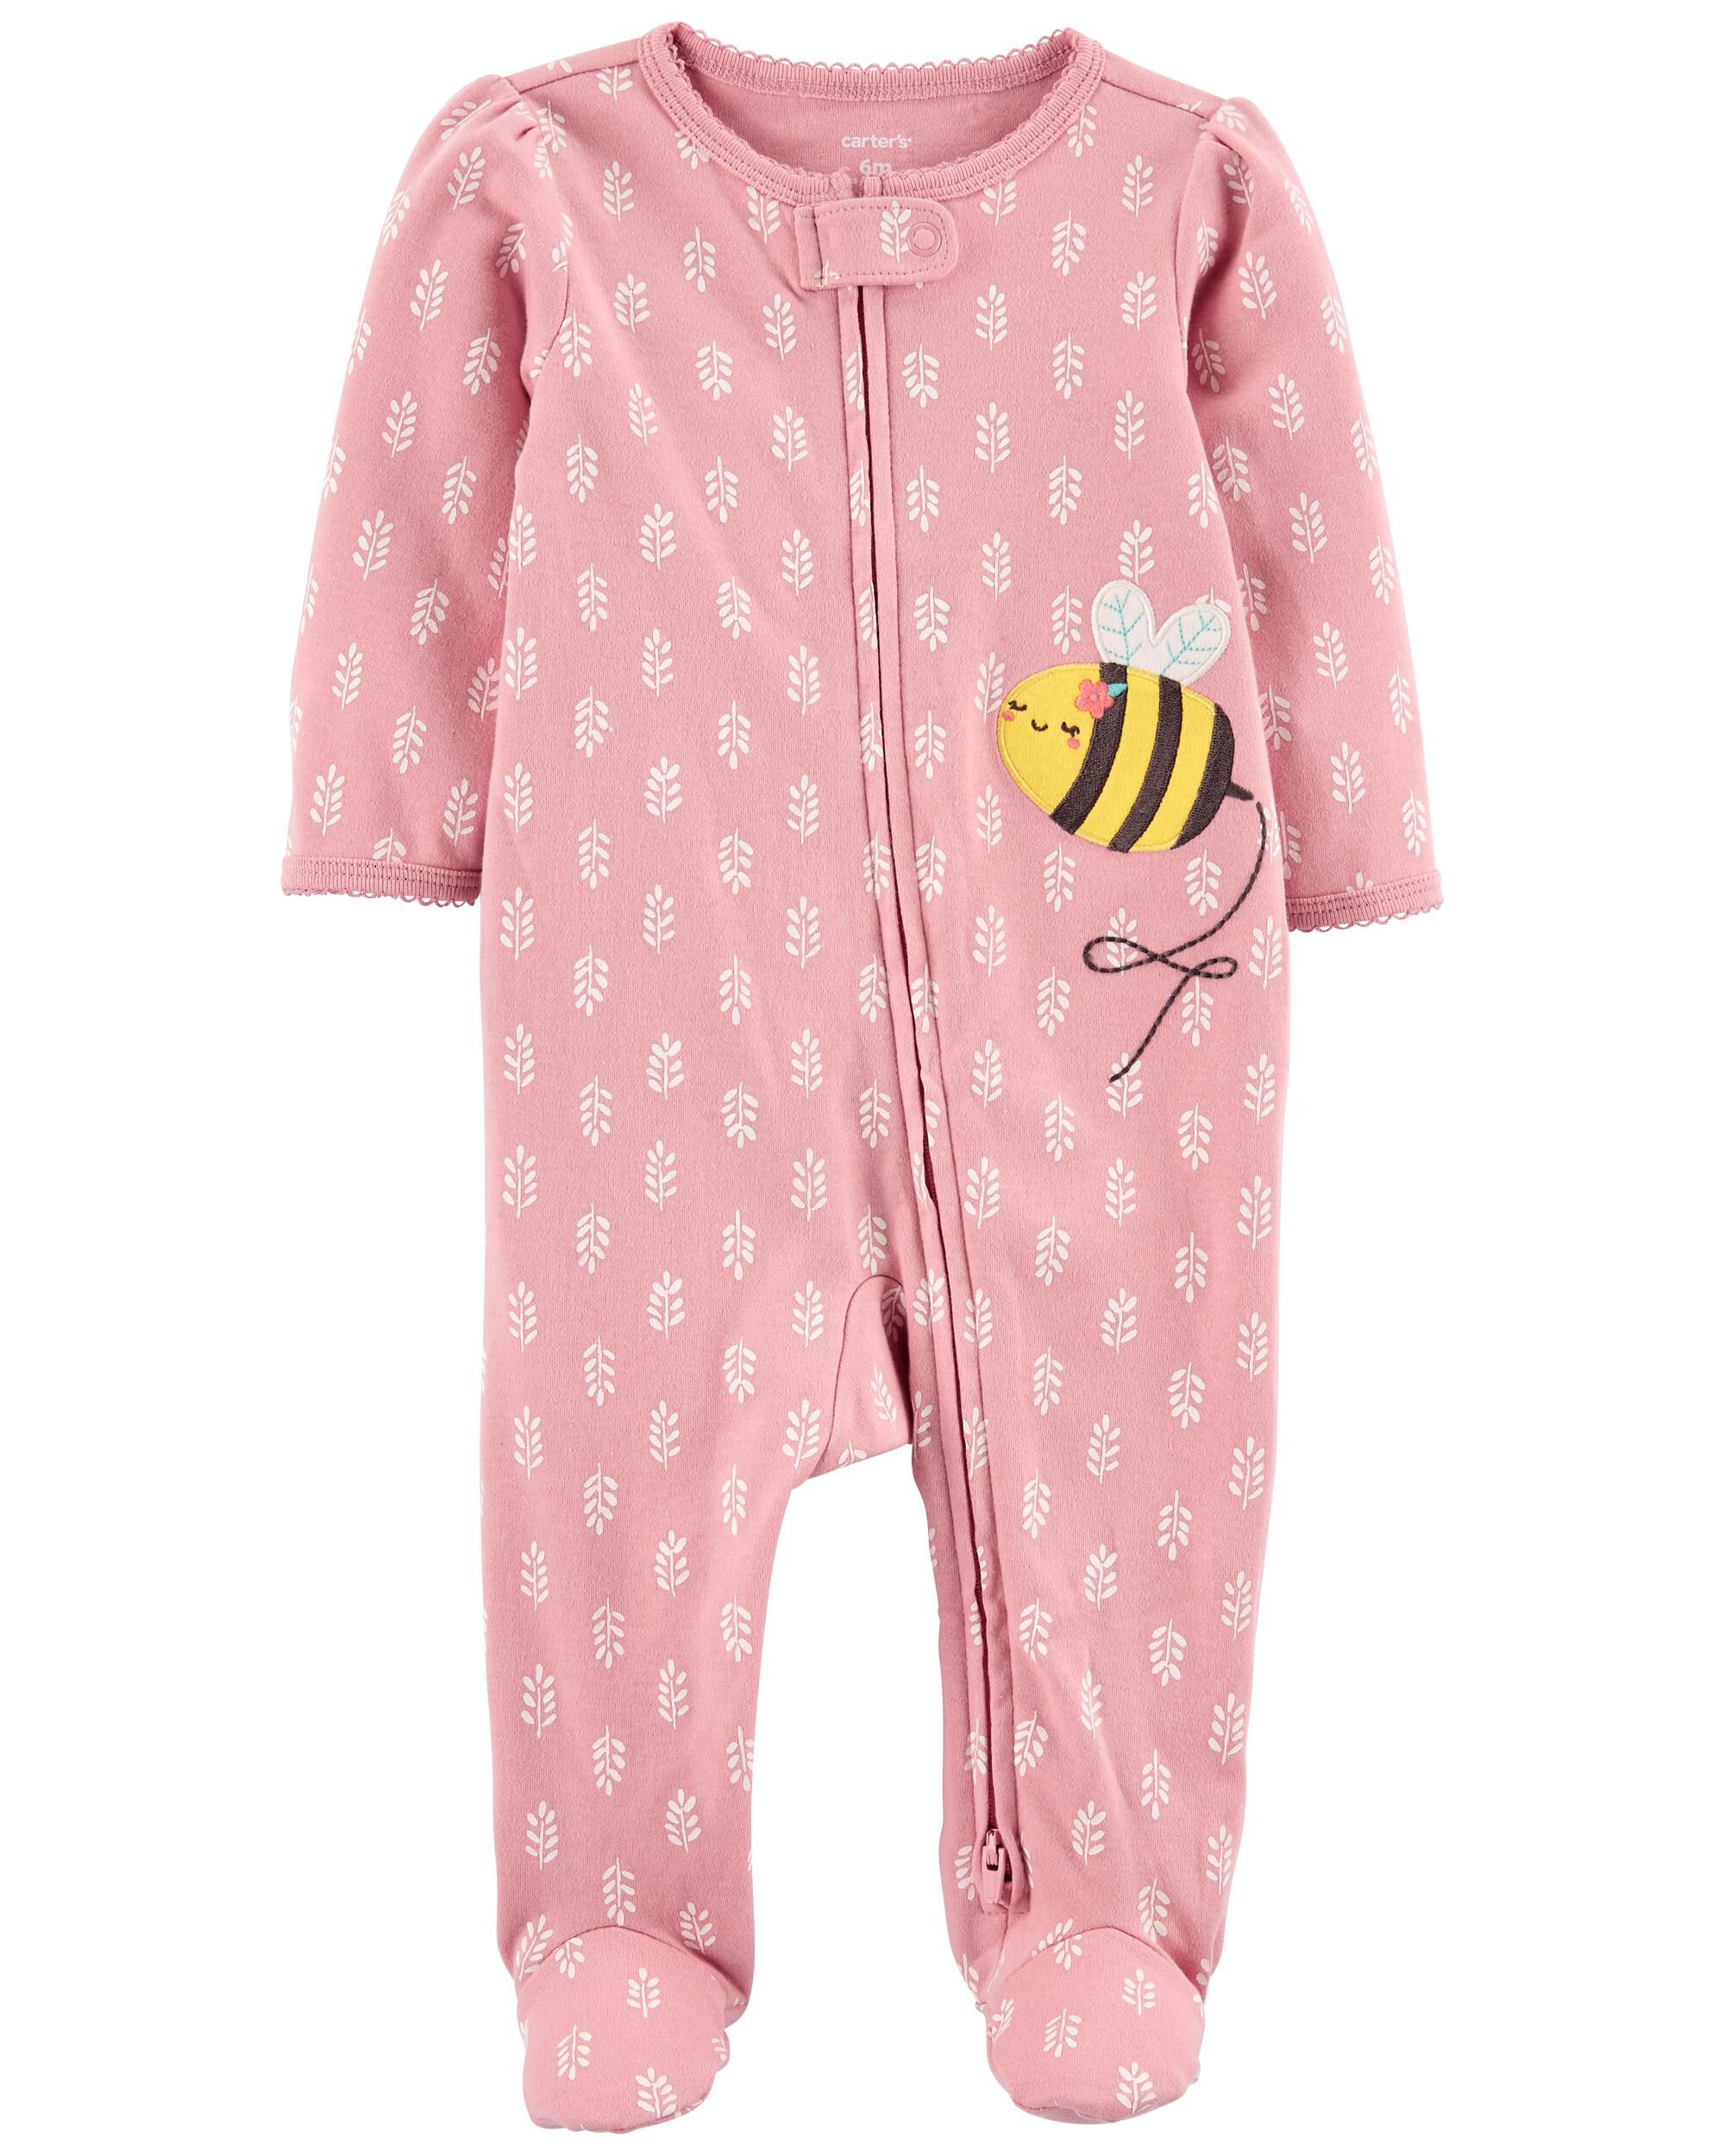 Details about   NWT 2T CARTER'S L/S PINK WITH CUTE BEAR FACE ONE PIECE PJ SLEEPER 